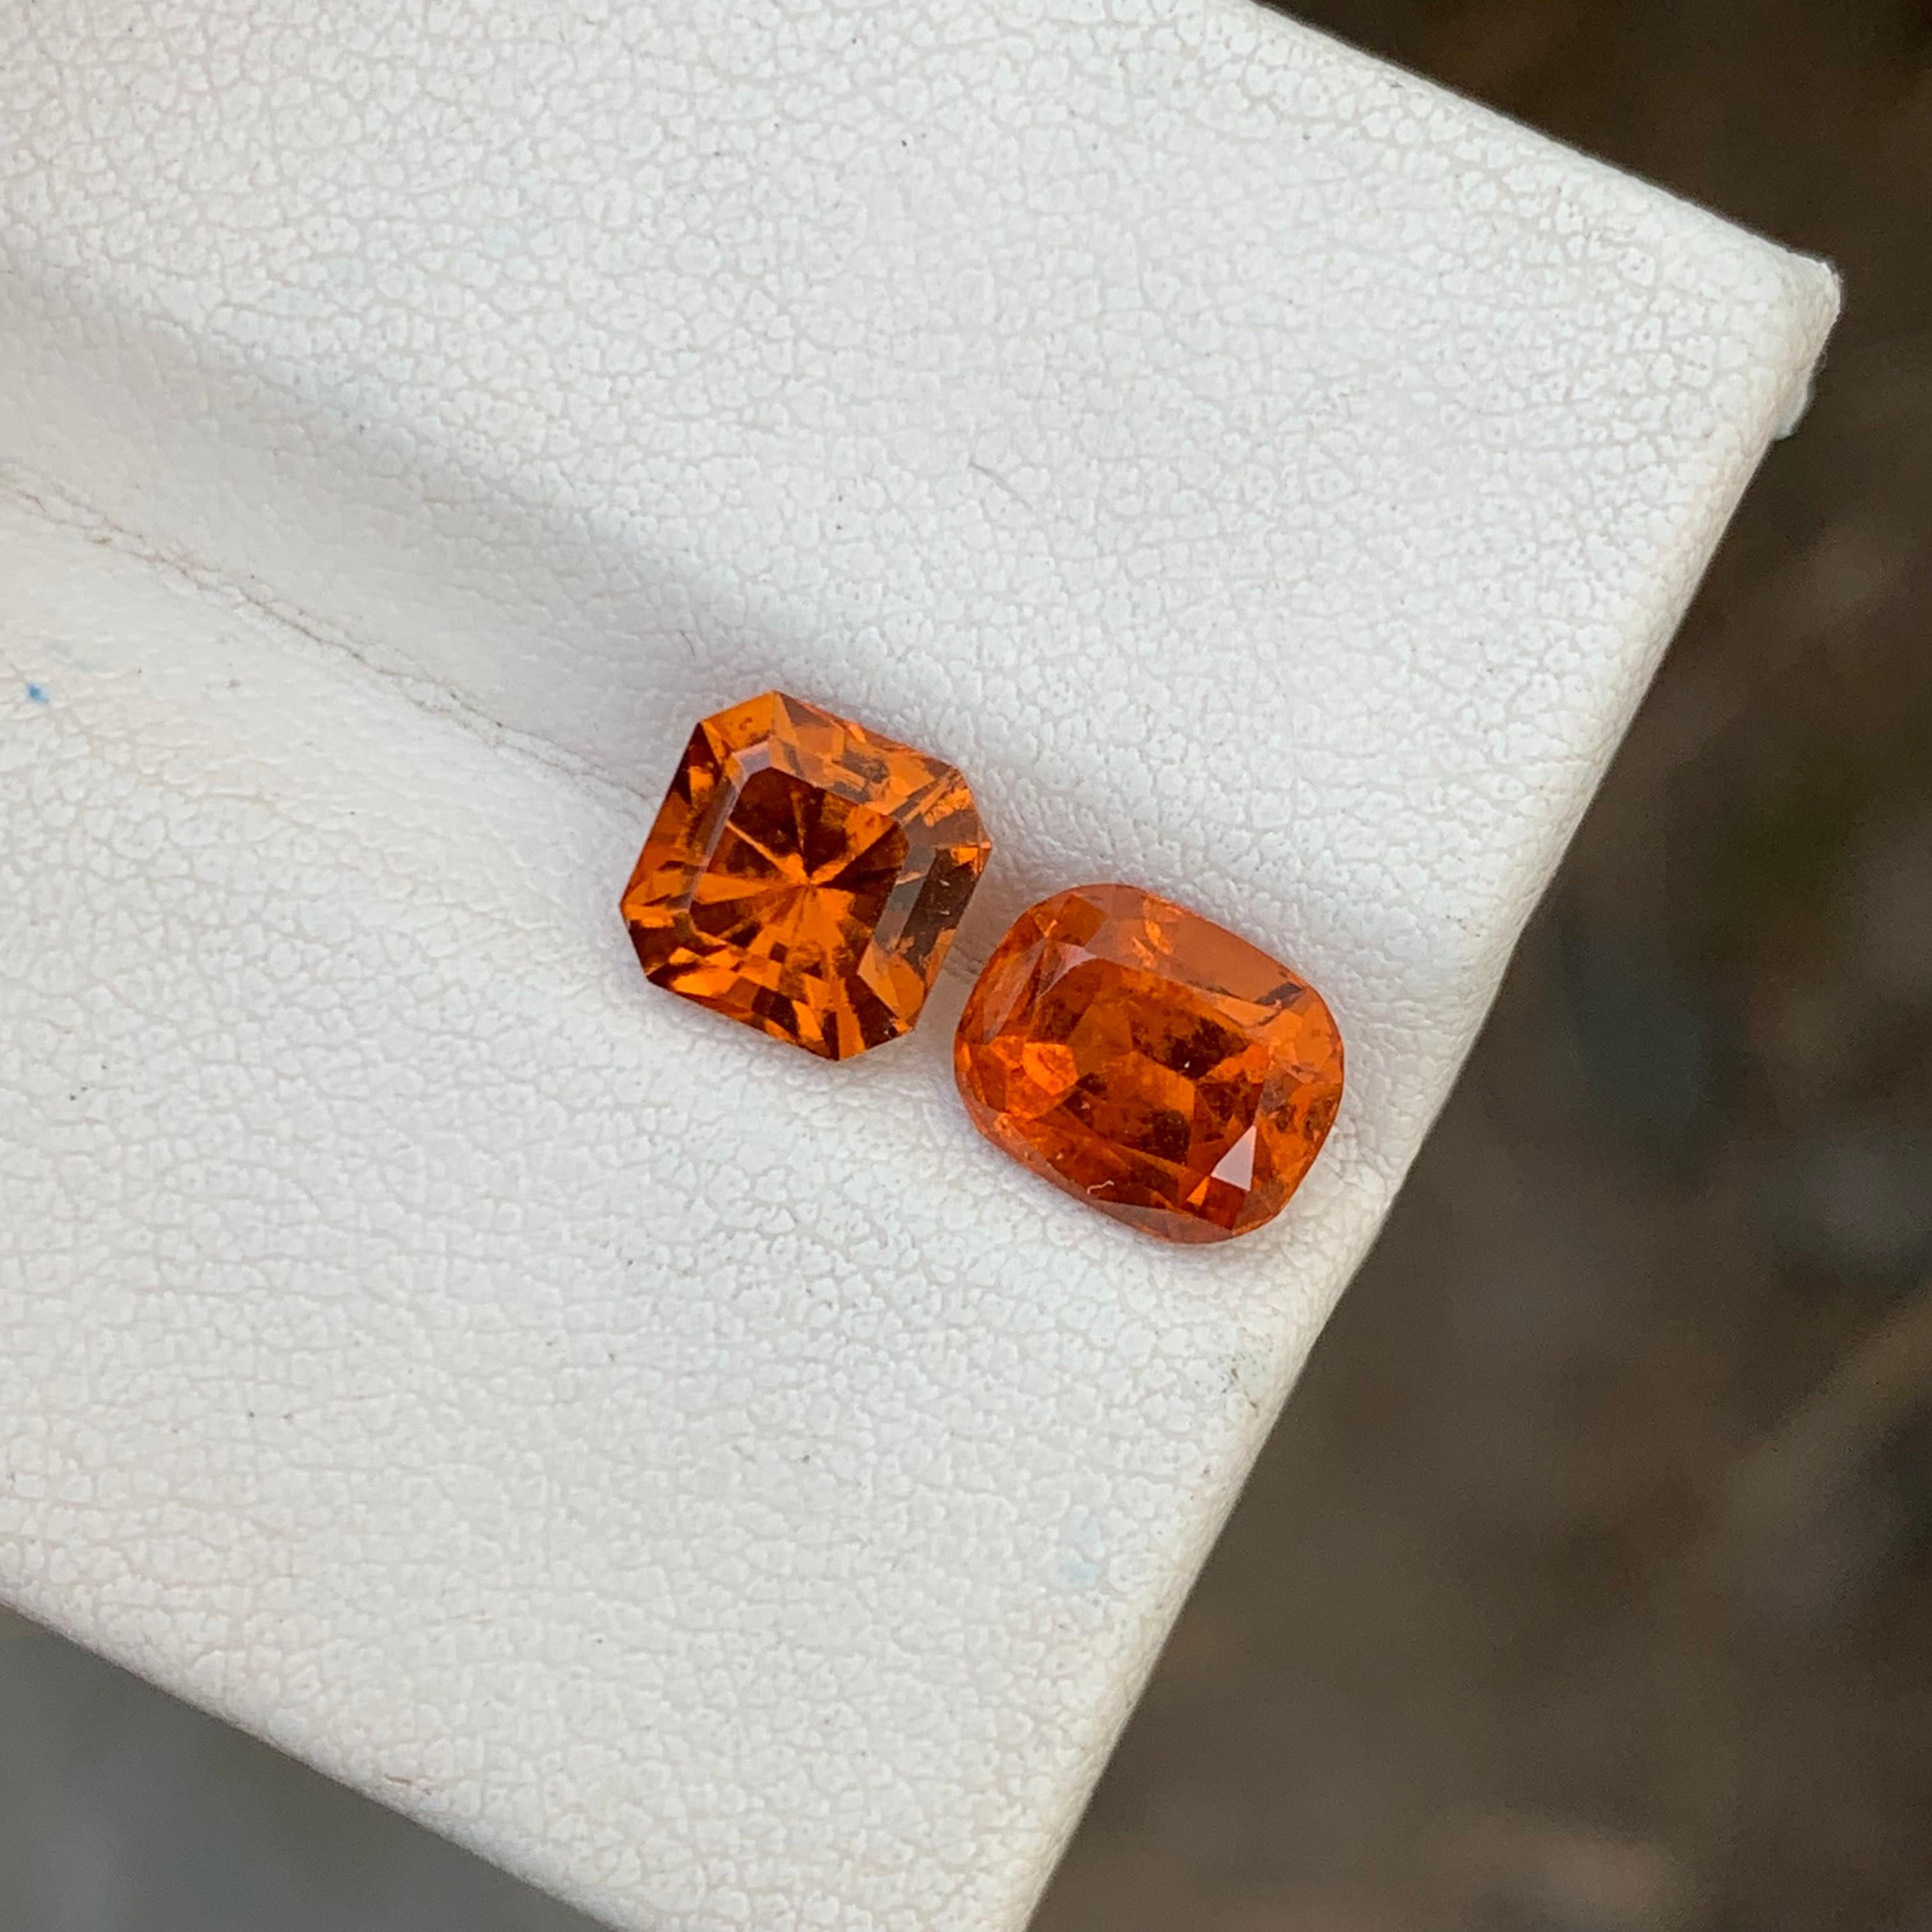 Loose Hessonite Garnet
Weight: 3.65 Carats 
Size: 1.75 & 1.85 Carats 
Origin: Madagascar Africa 
Shape: Square & Cushion 
Color: Orange Fanta
Treatment: Non
Certificate: On Demand
Hessonite garnet, also known as 